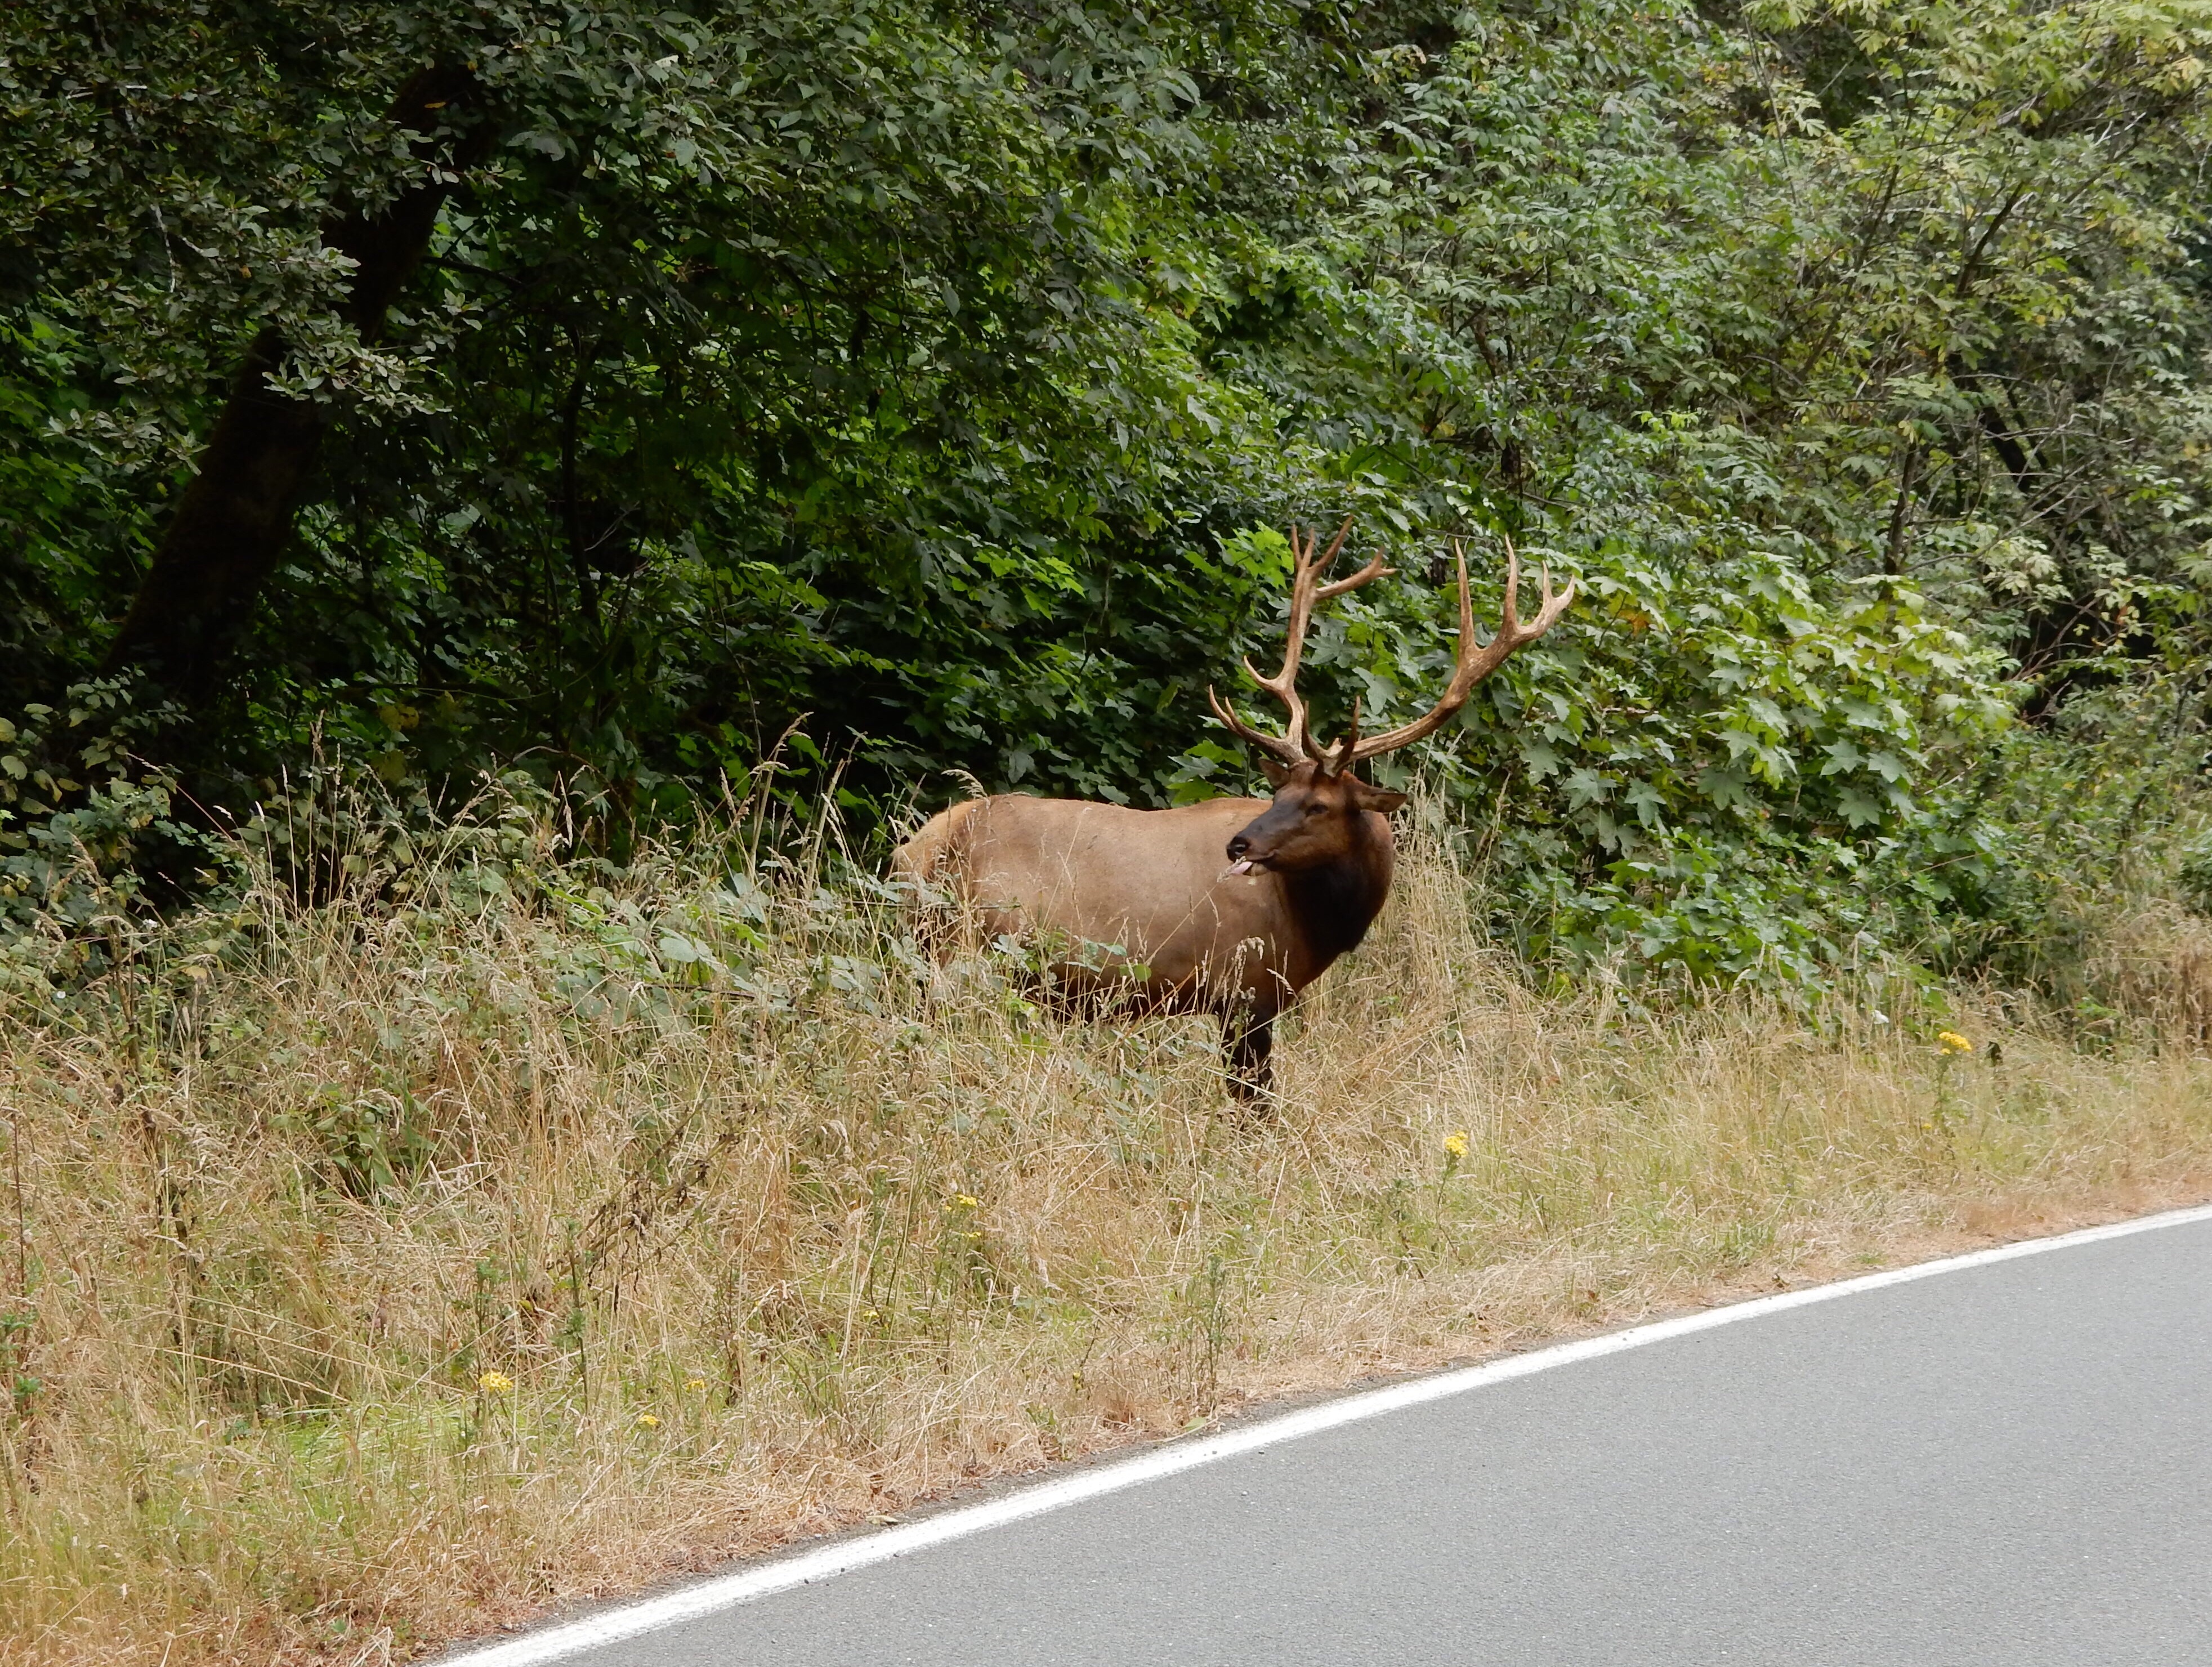 A bull elk grazes next to the road along the northern woodland region of California Highway 1.